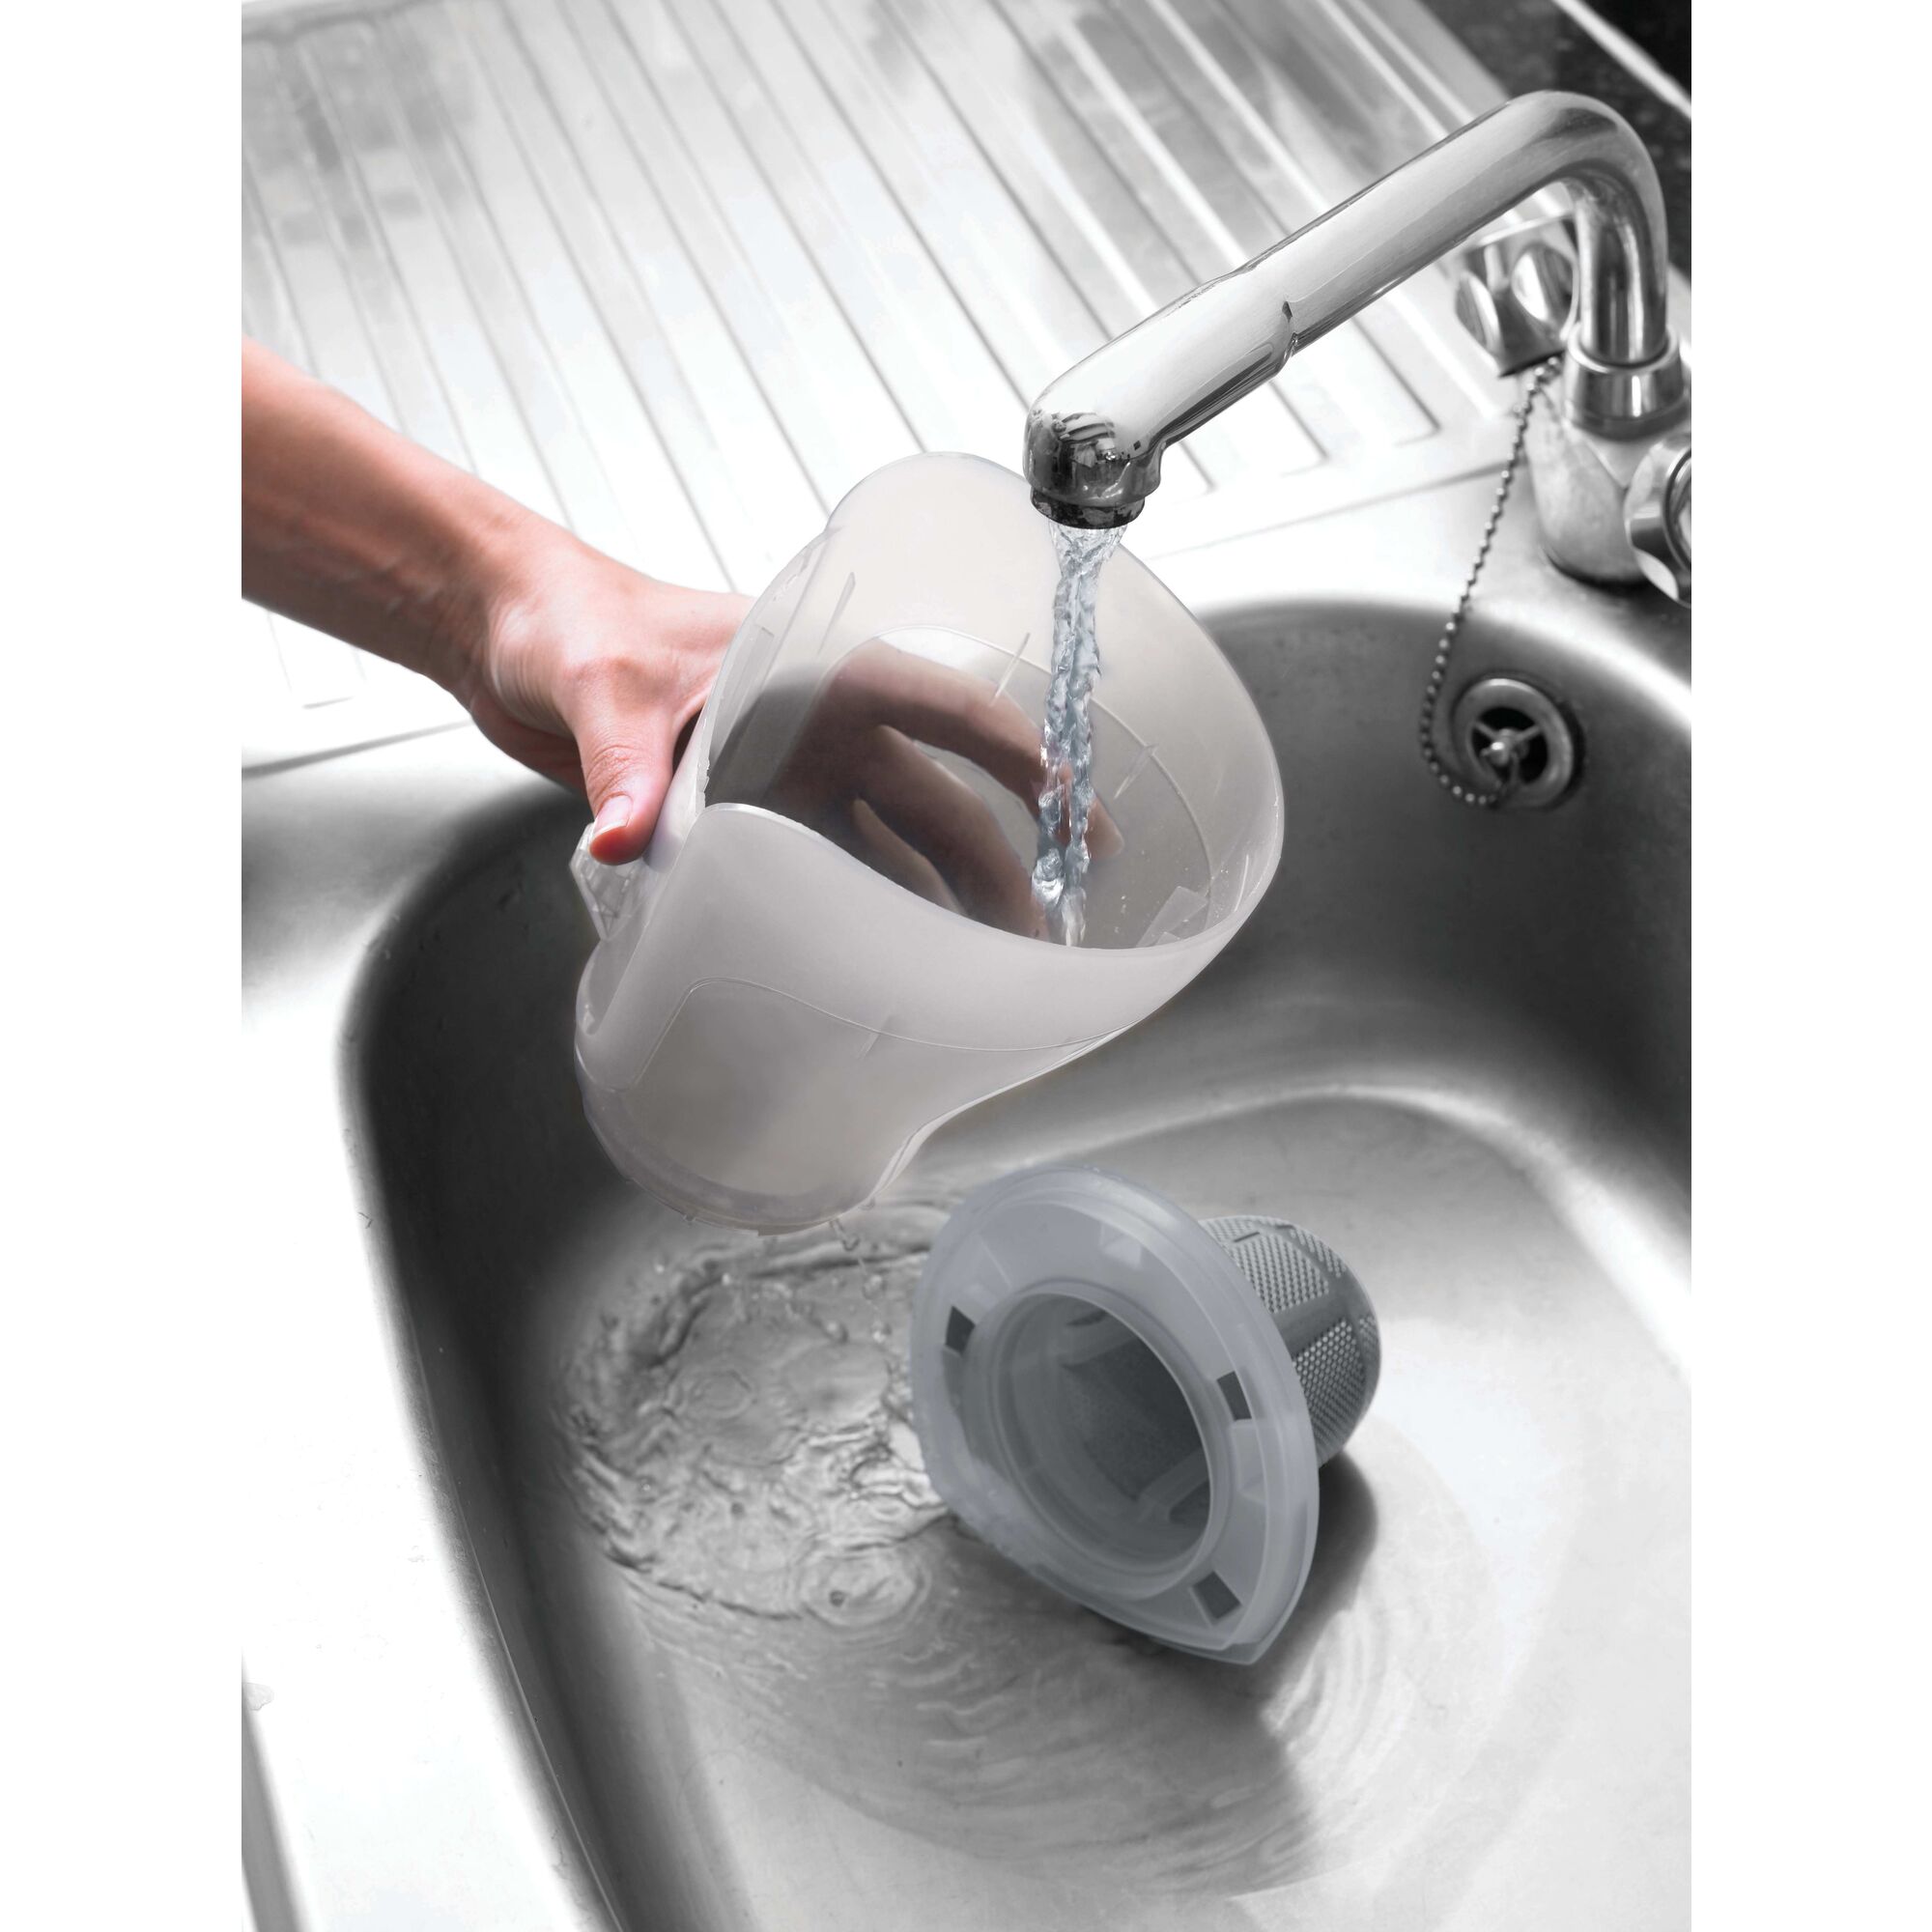 Washable bowl feature of Dustbuster cordless hand vacuum.